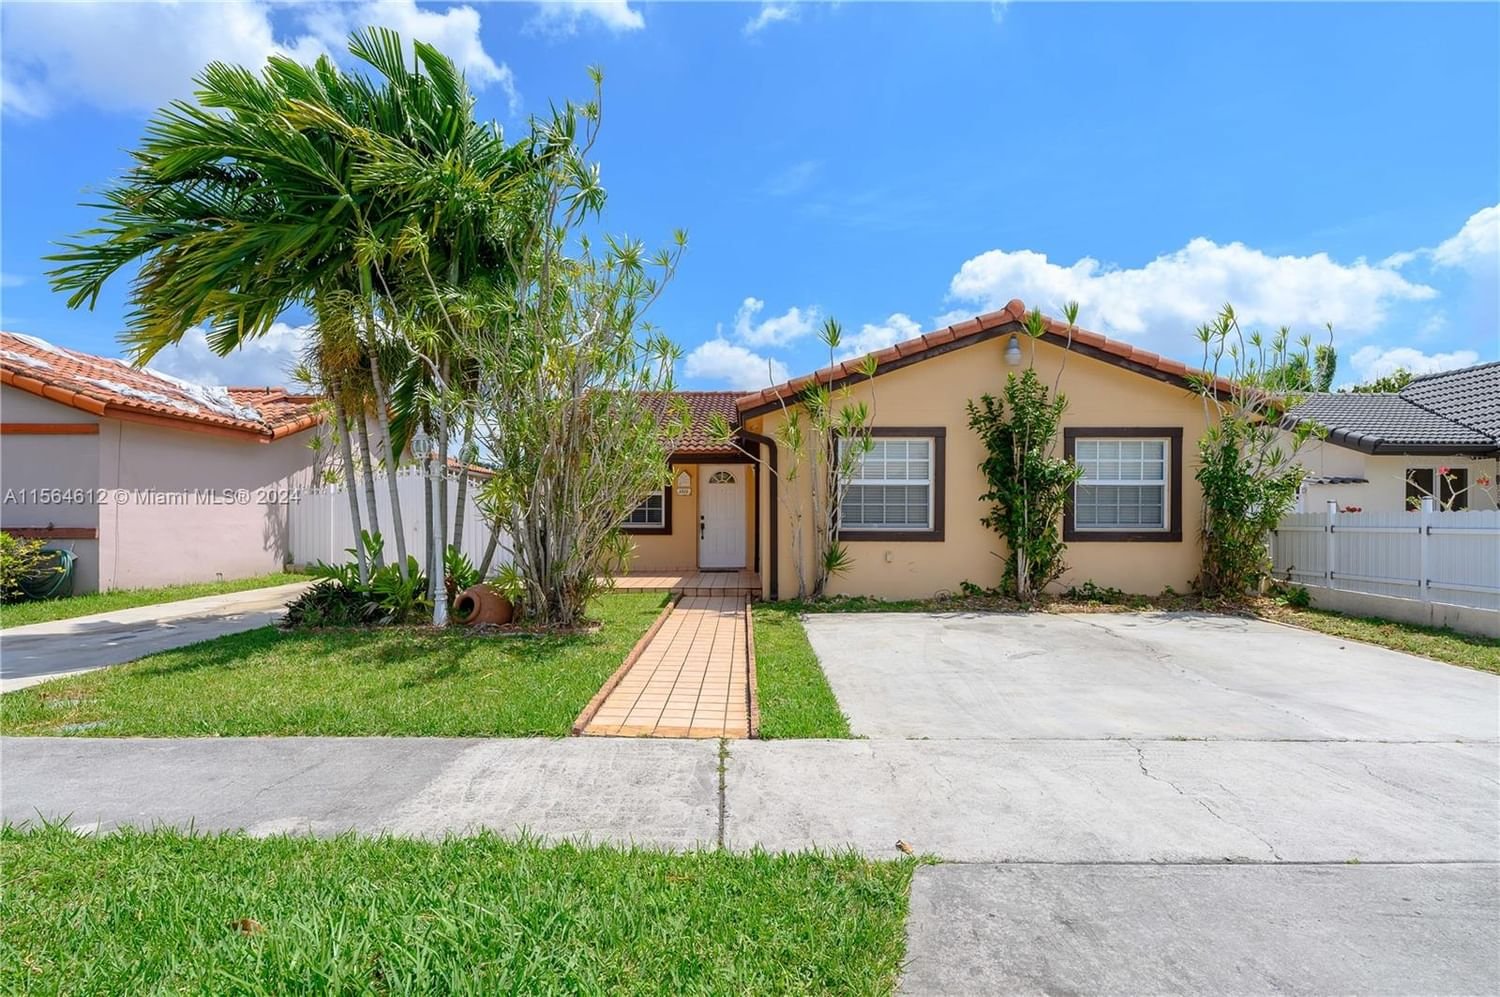 Real estate property located at 1521 138th Ave, Miami-Dade County, CORAL WEST HEIGHTS 2ND AD, Miami, FL